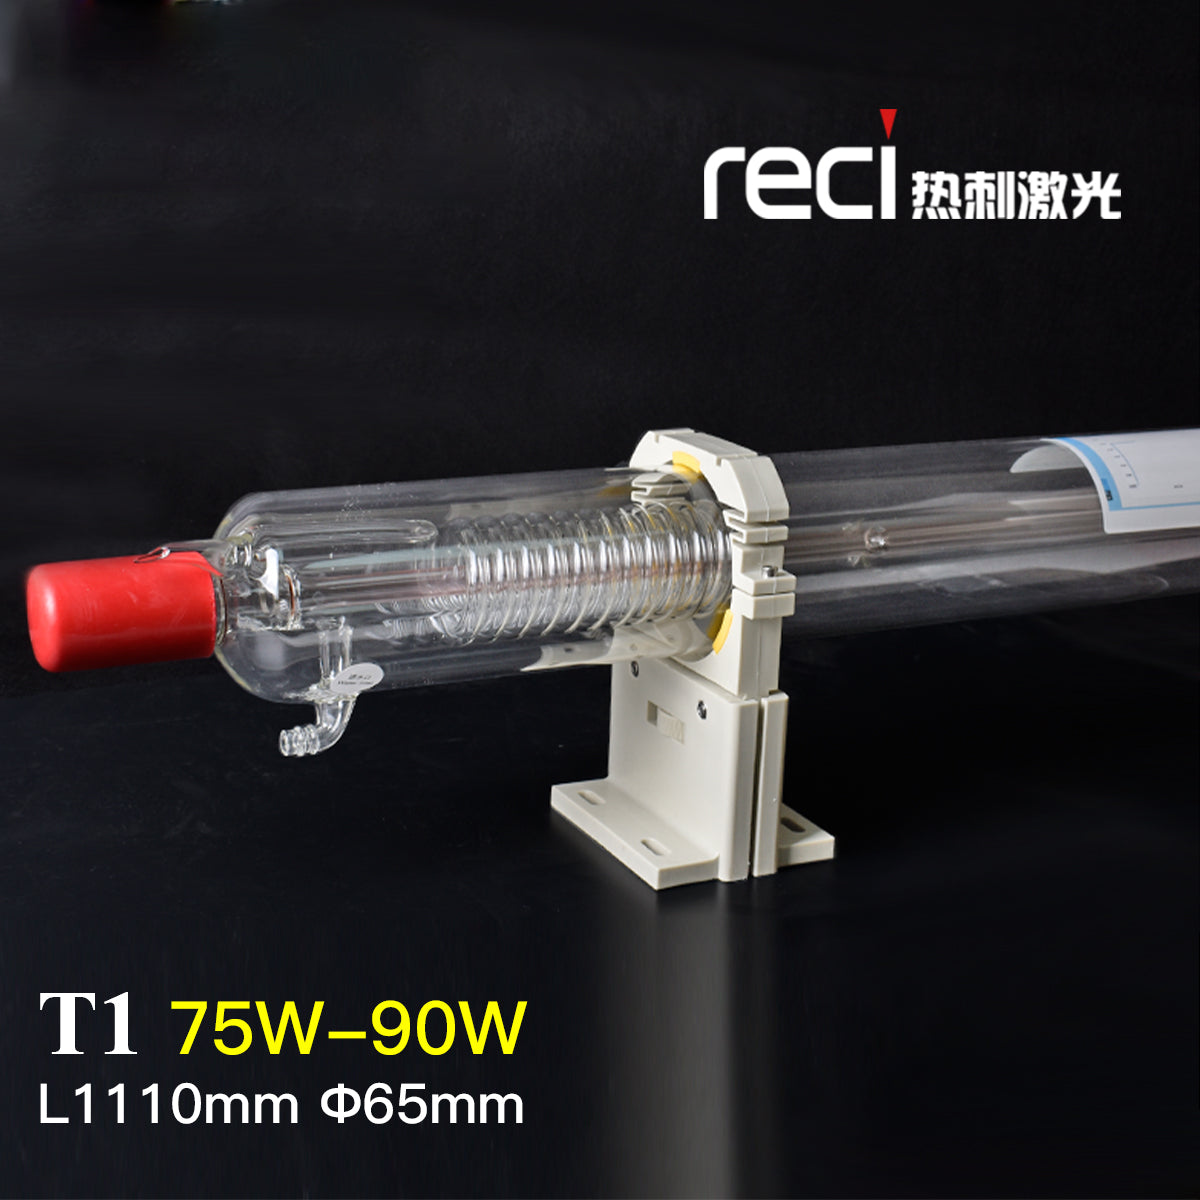 Reci CO2 Laser Tube T1 W1 Special For CO2 Laser Carving Engraving Machine Marking Equipment Lamp Matching With DY10 Power Supply